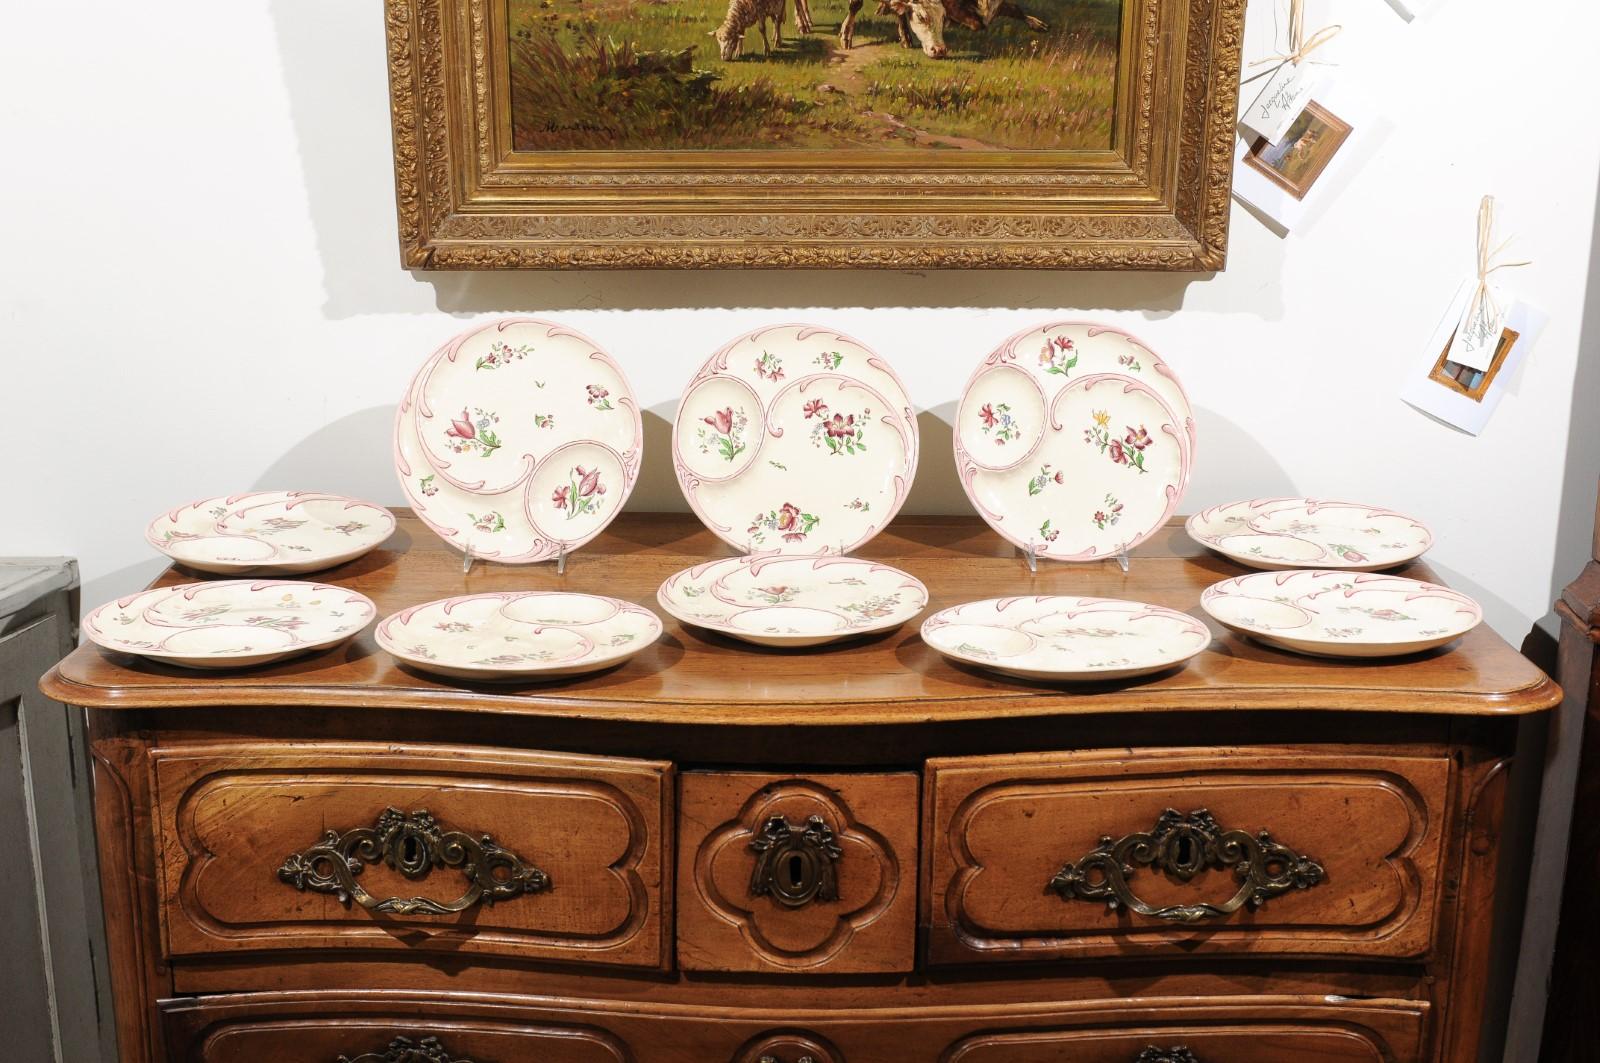 Ten French Sarreguemines Majolica asparagus plates from the 19th century with floral décor, priced and sold individually. Born in France during the 19th century, each of these delicate Sarreguemines asparagus plates features a lovely hand painted